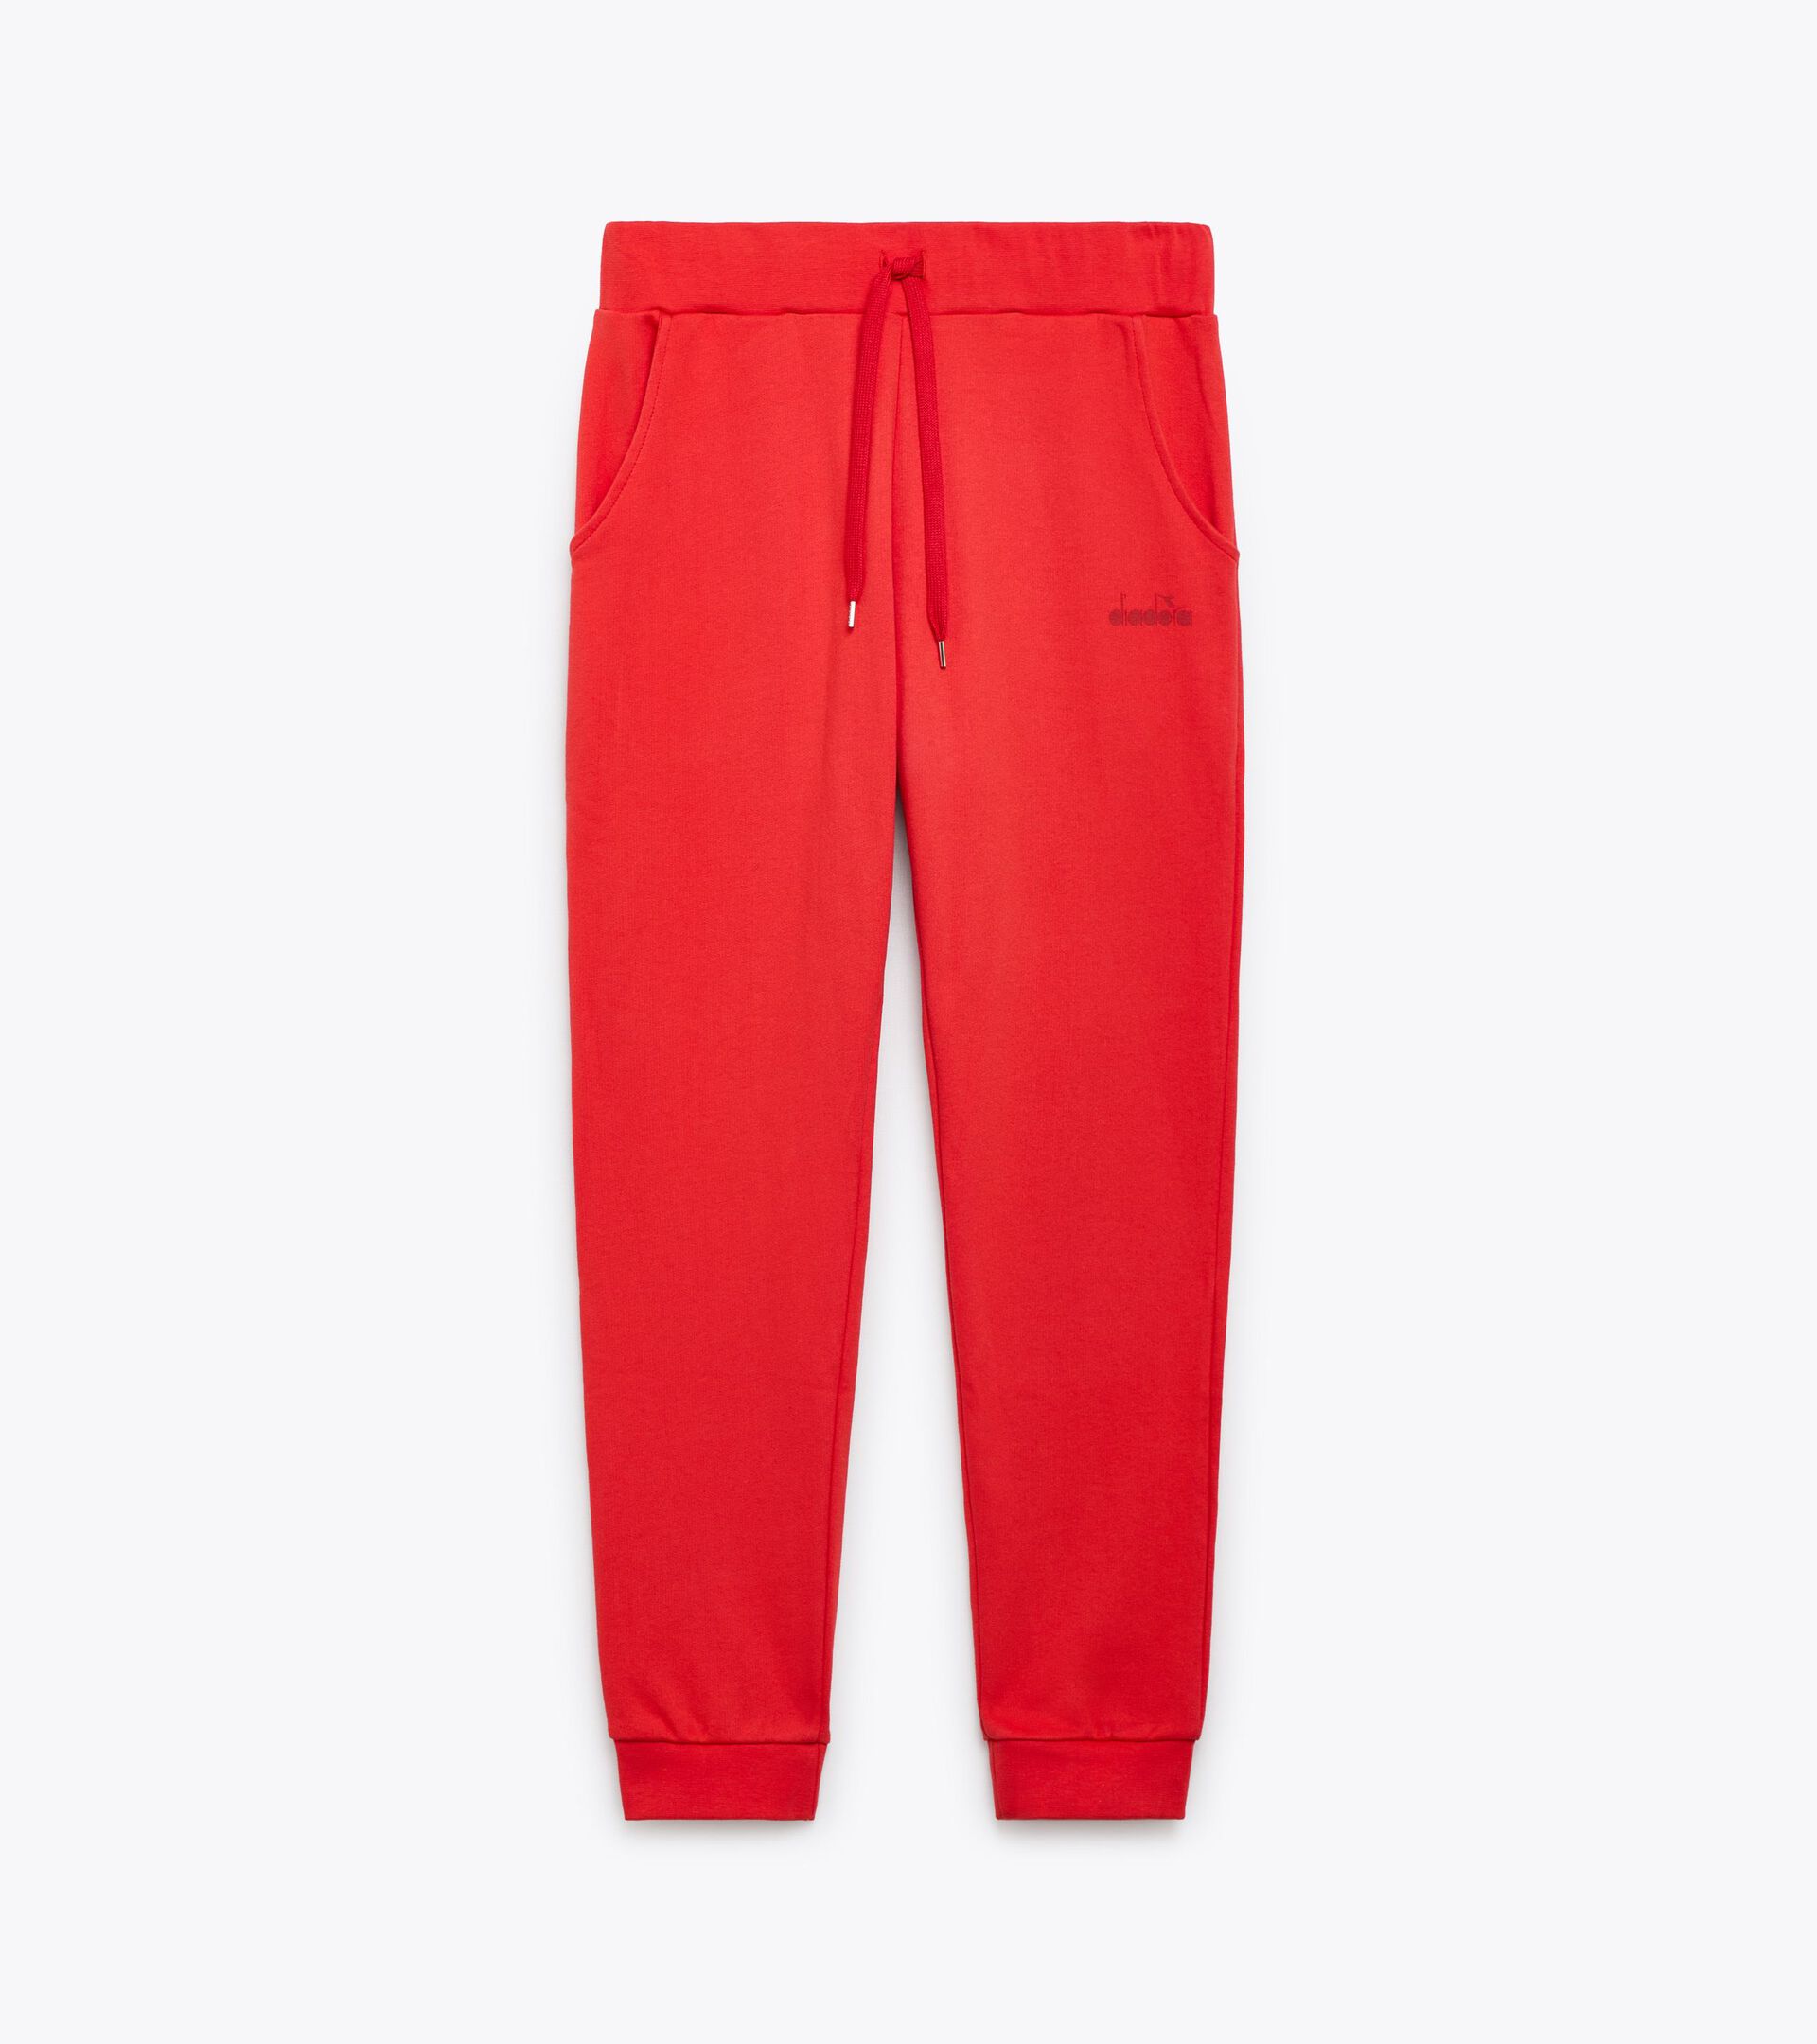 Sporty sweatpants - Made in Italy - Gender Neutral PANTS LOGO BITTERSWEET RED - Diadora